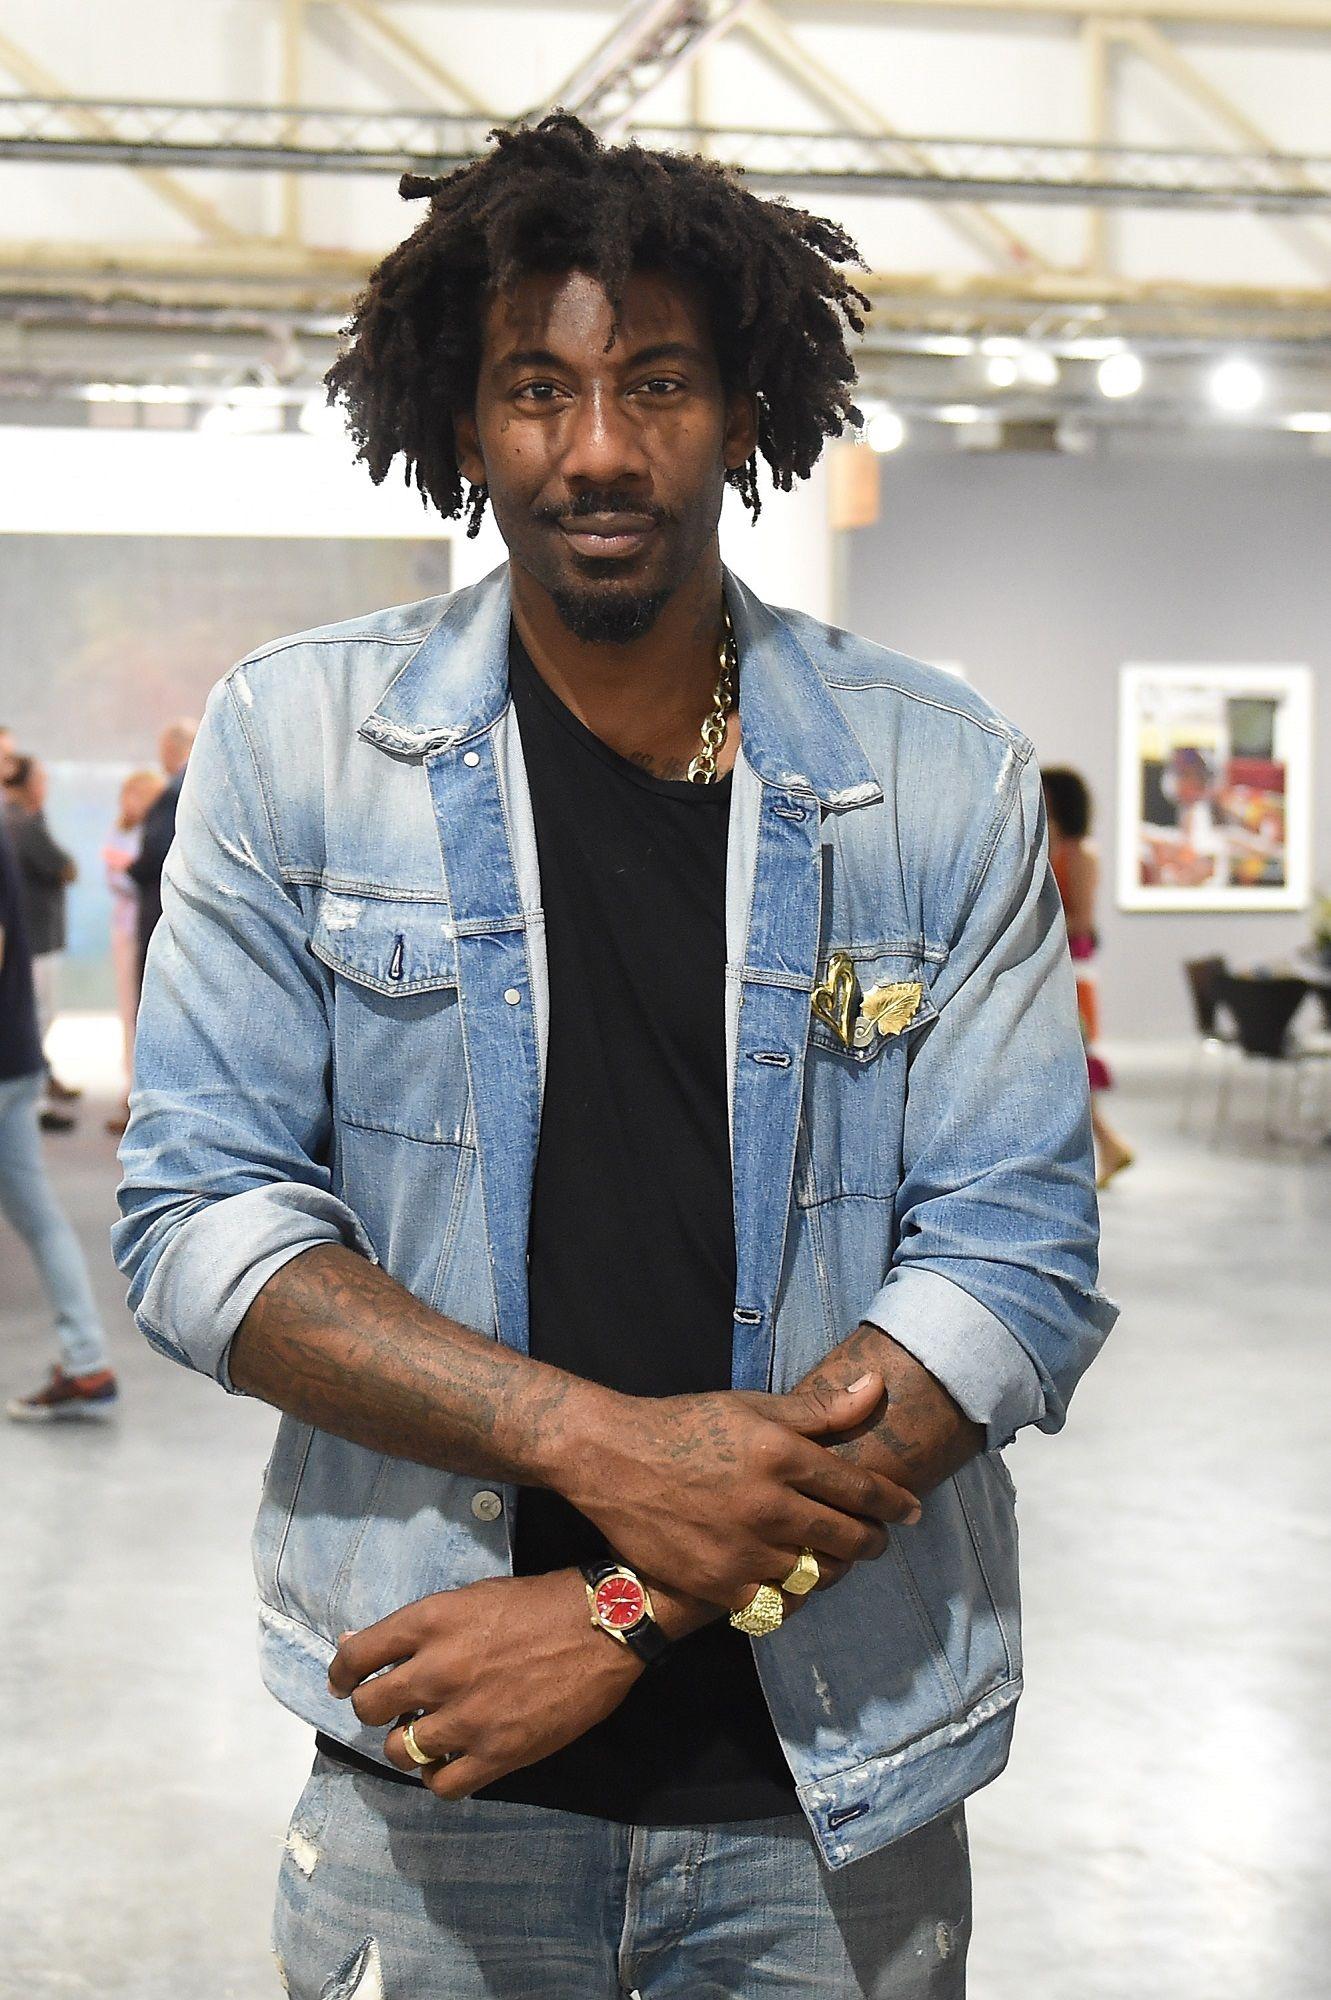 How NBA star Amar'e Stoudemire spent his first paycheck